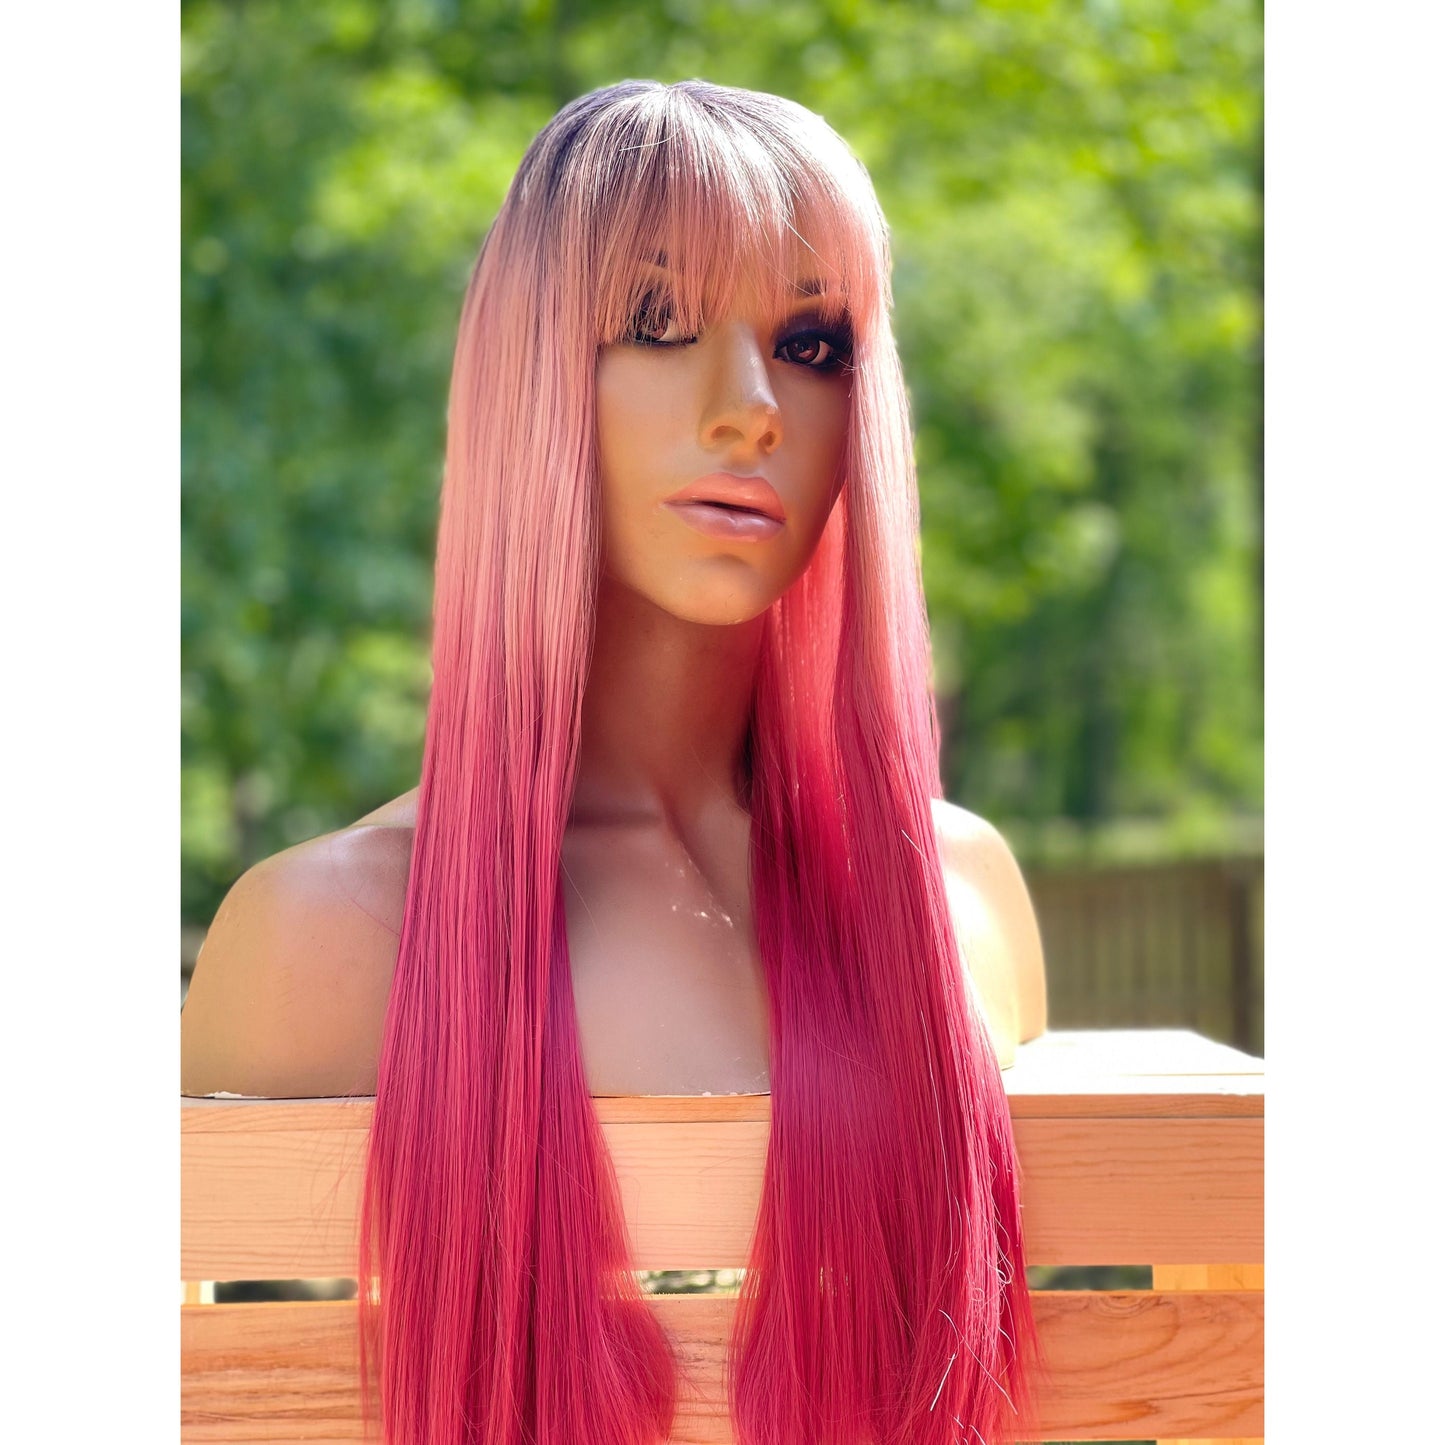 24” pink ombre dark root balayage full cap long straight human hair blend wig